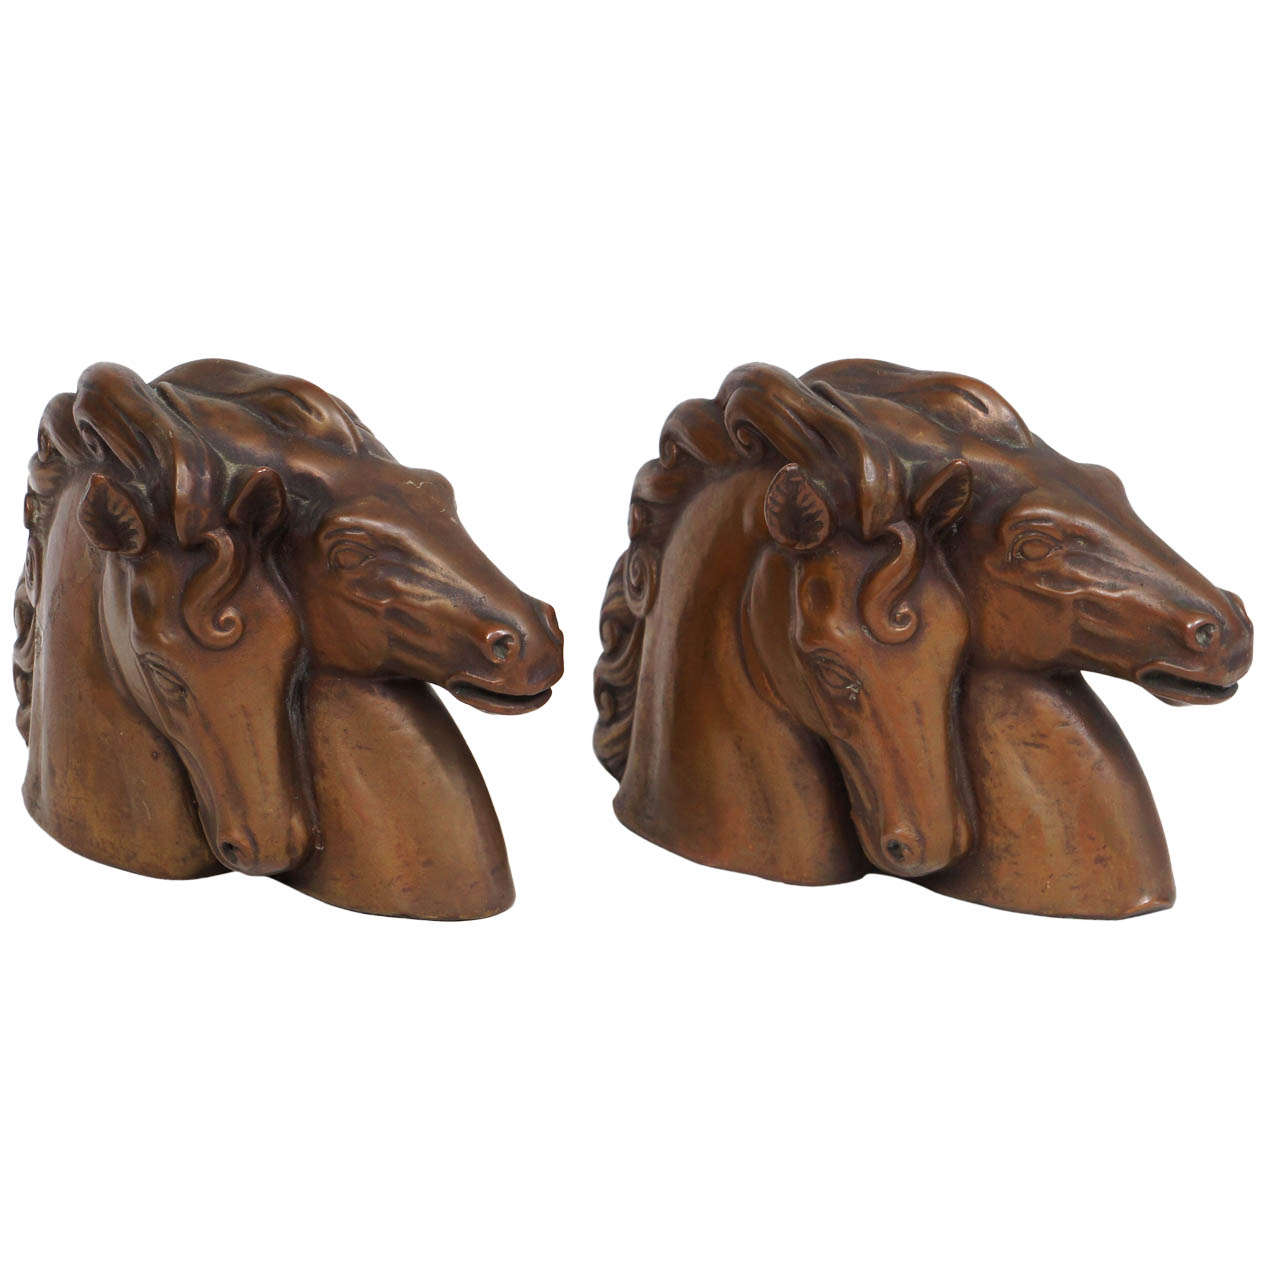 Mixed Metal Equine/Horsehead Bookends